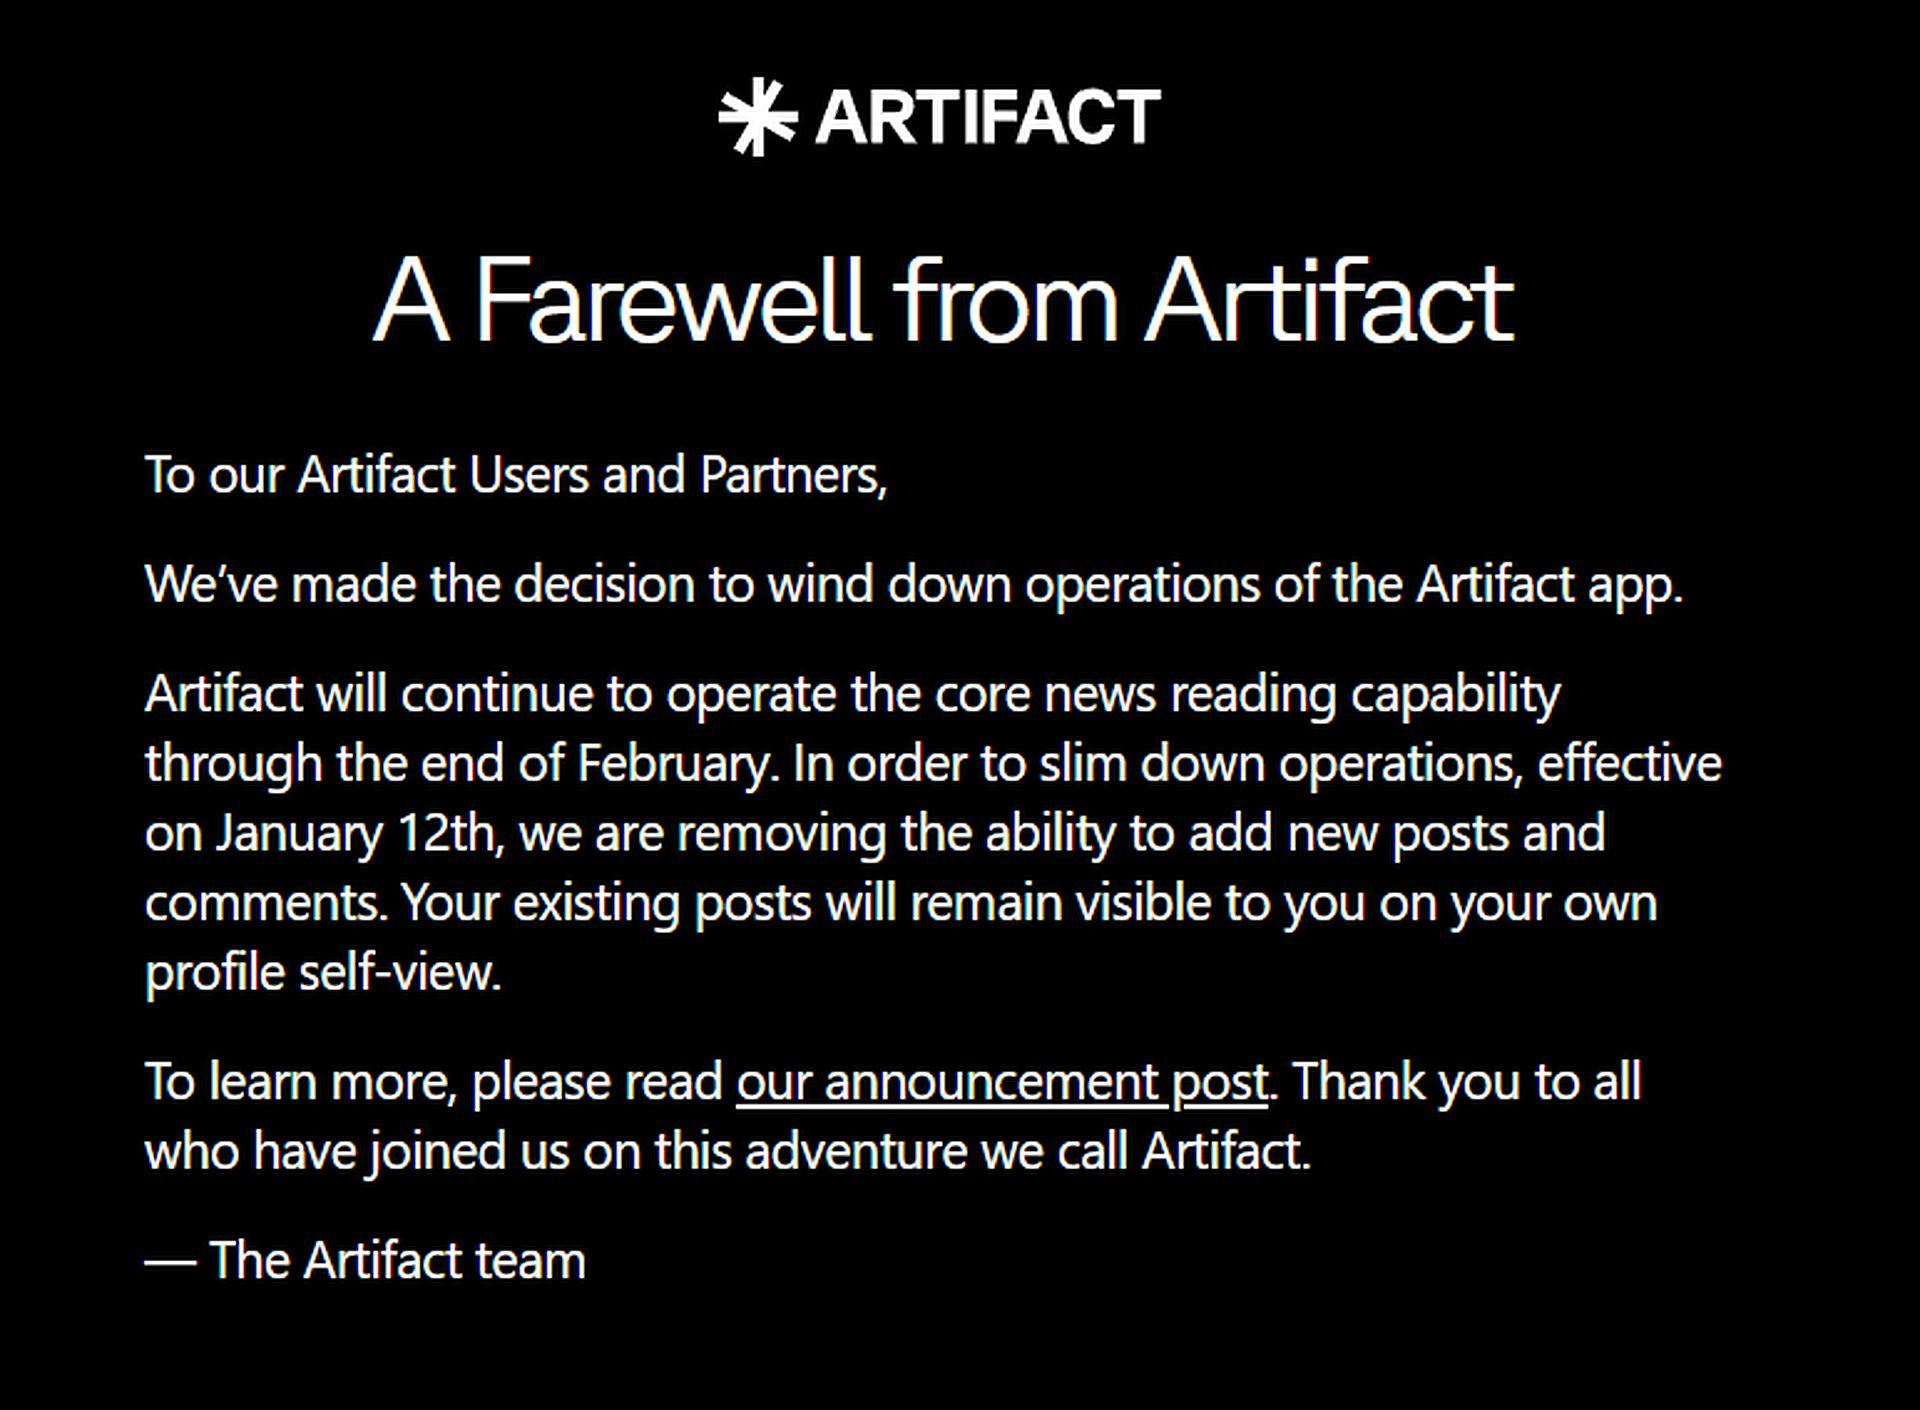 Yahoo's strategic leap into personalized news with Artifact